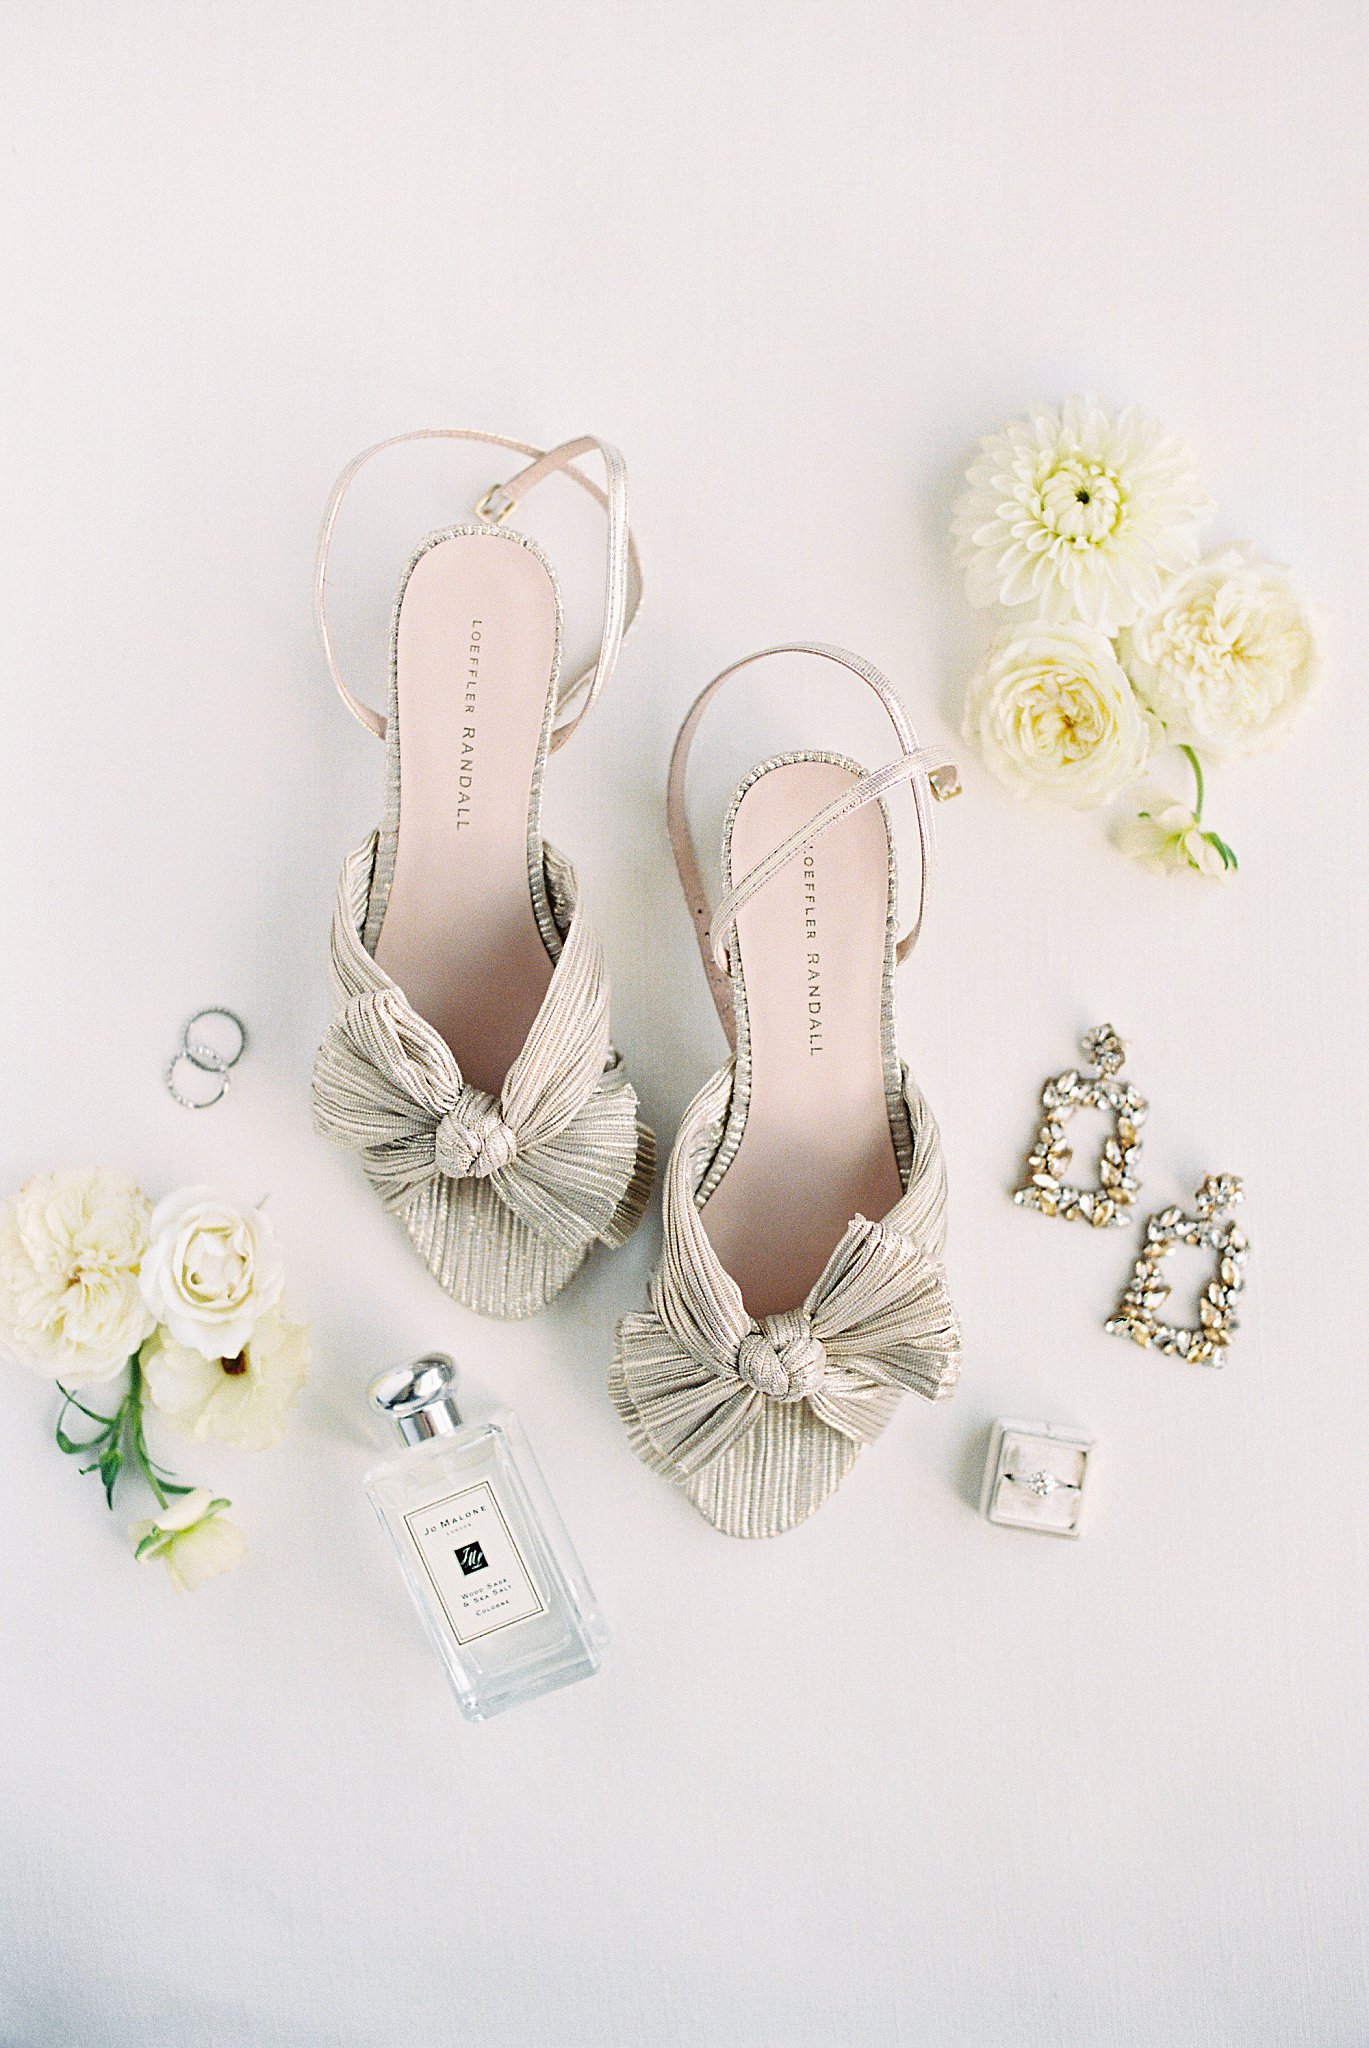 bridal details including heels, earrings, and jewelry are displayed by Boston wedding photographer